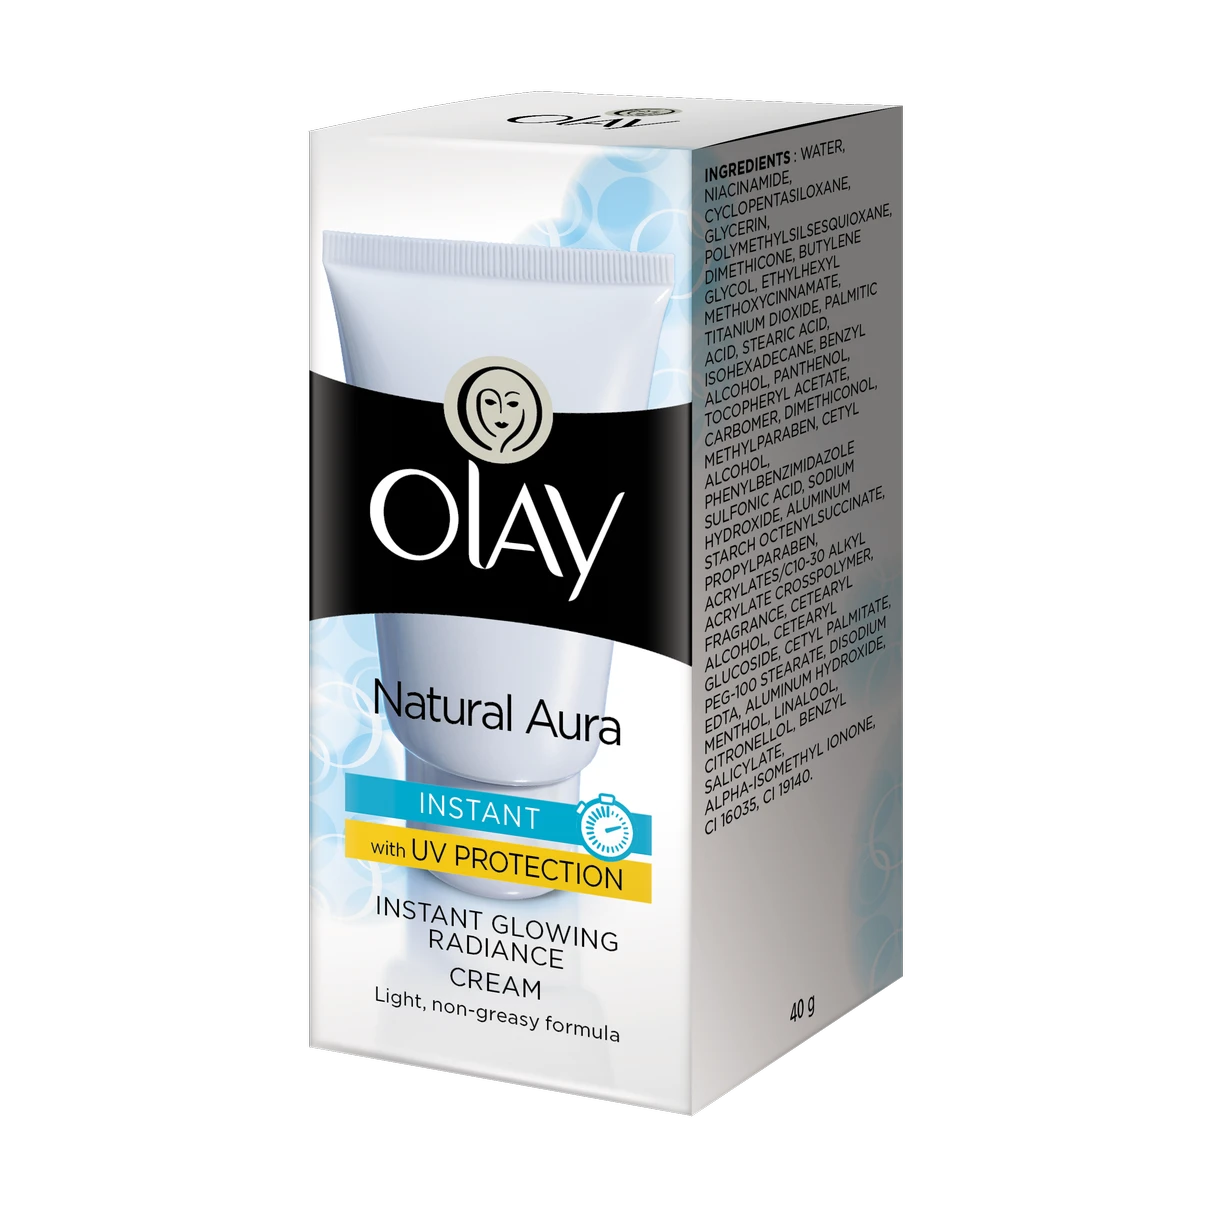 Olay Natural Aura 7 IN ONE Instant Glowing Radiance with UV Protection